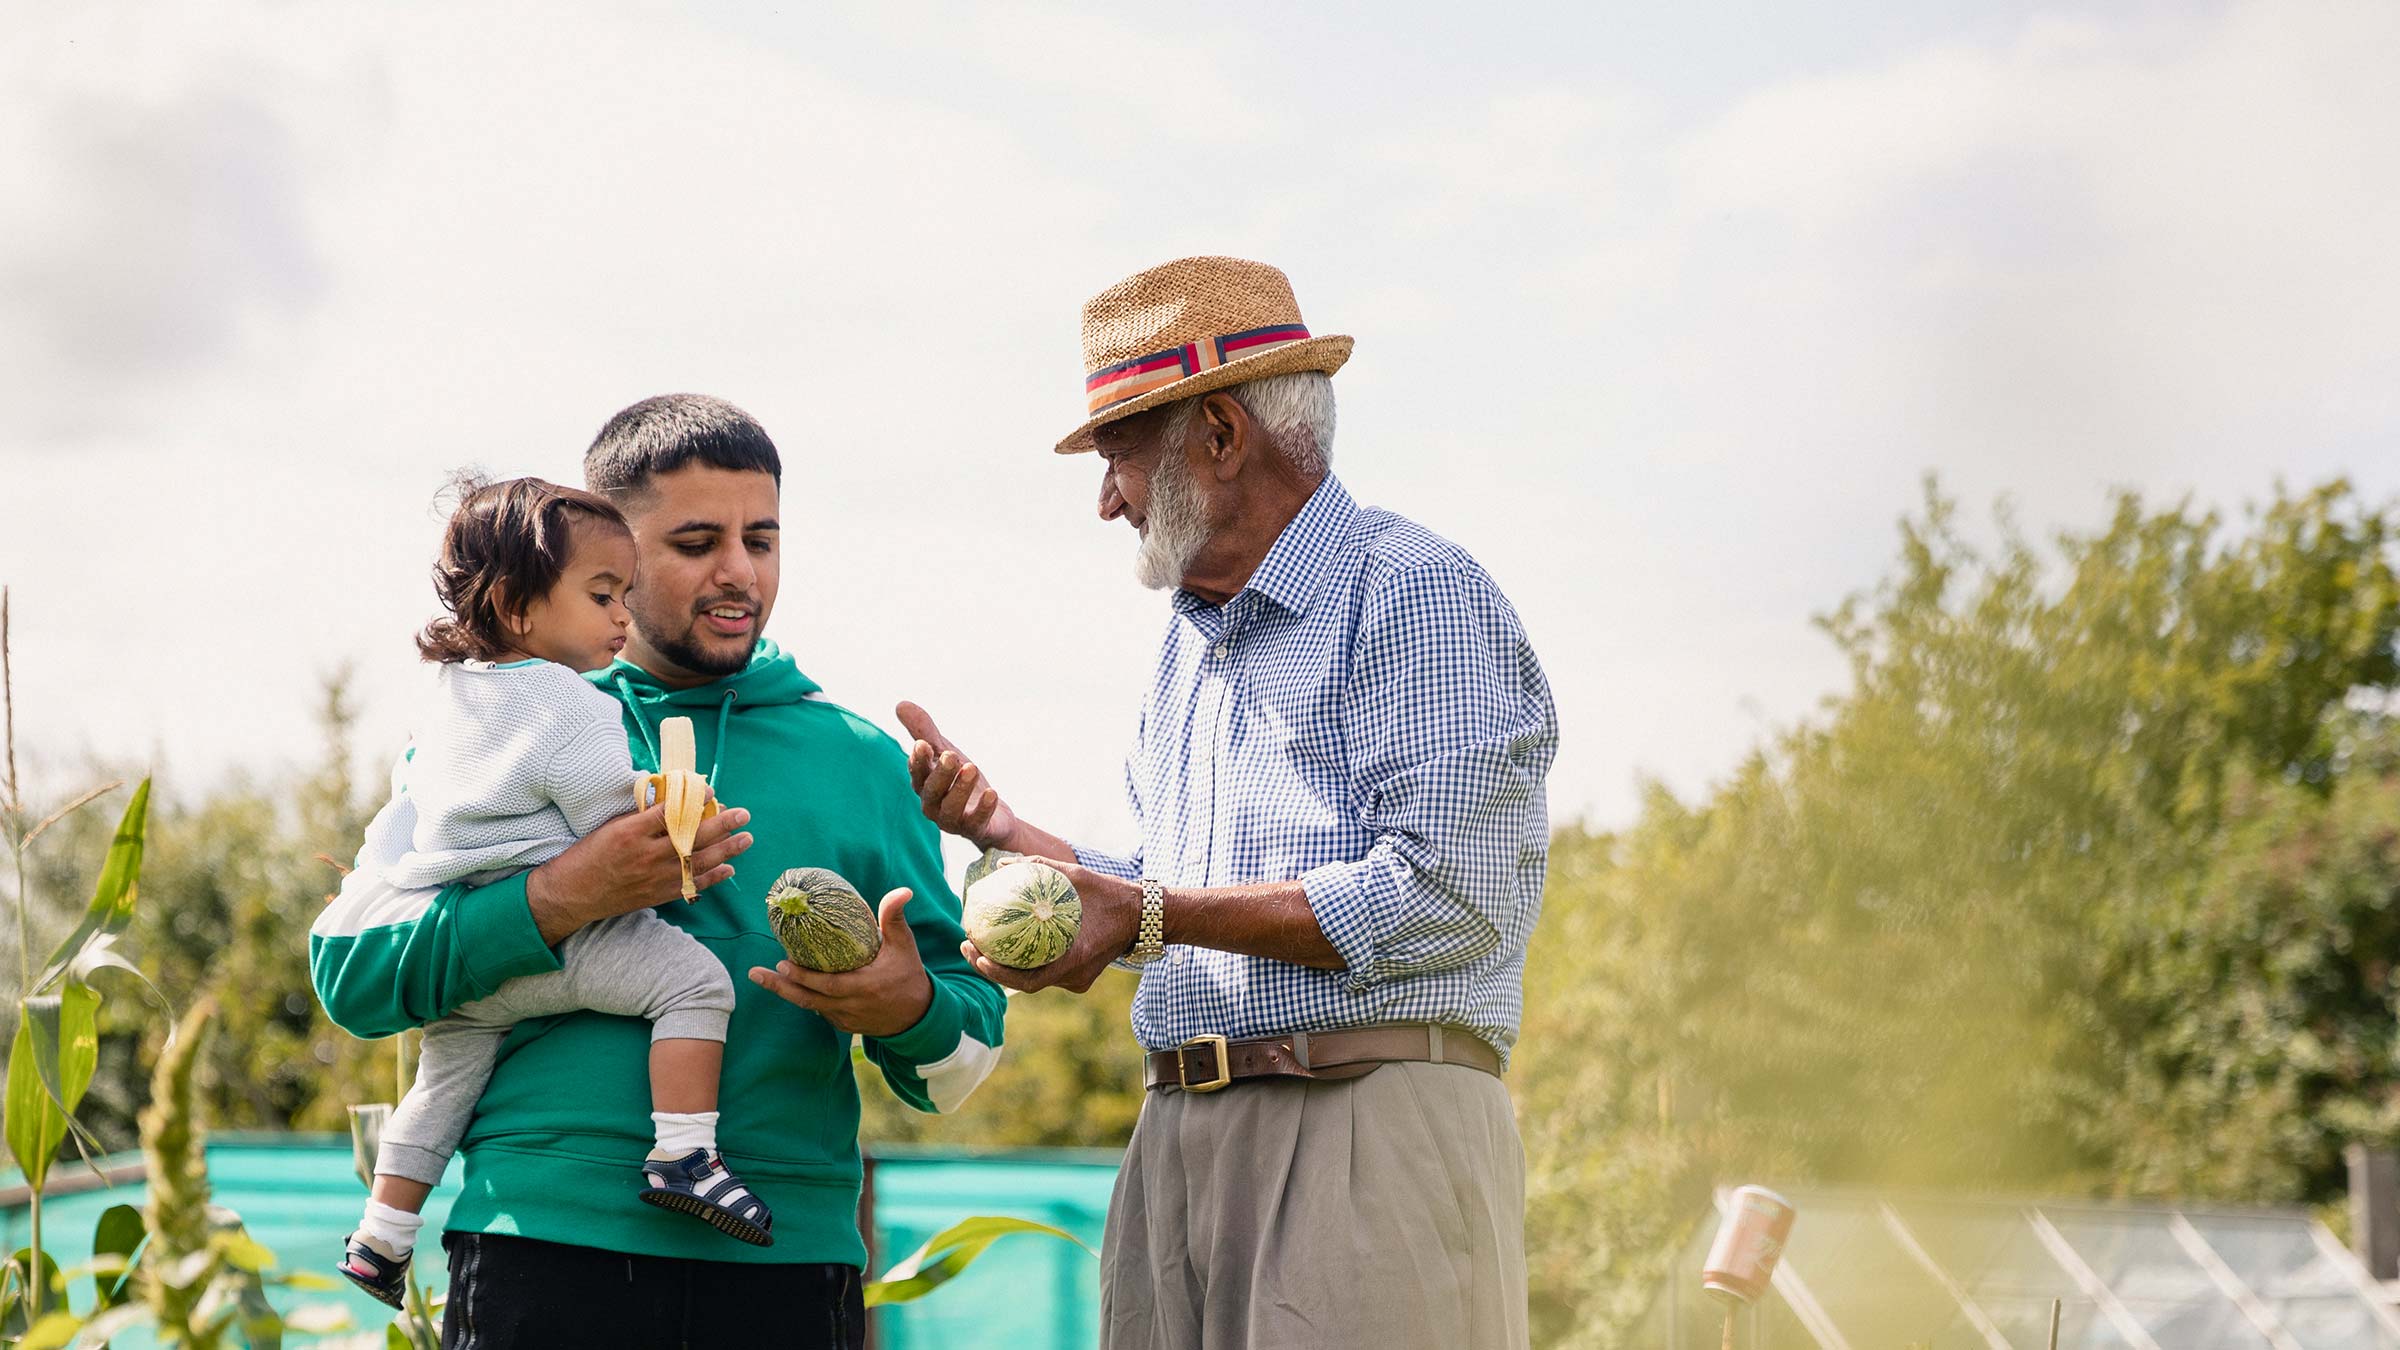 Father and daughter with Grandfather discussing vegetables in an allotment